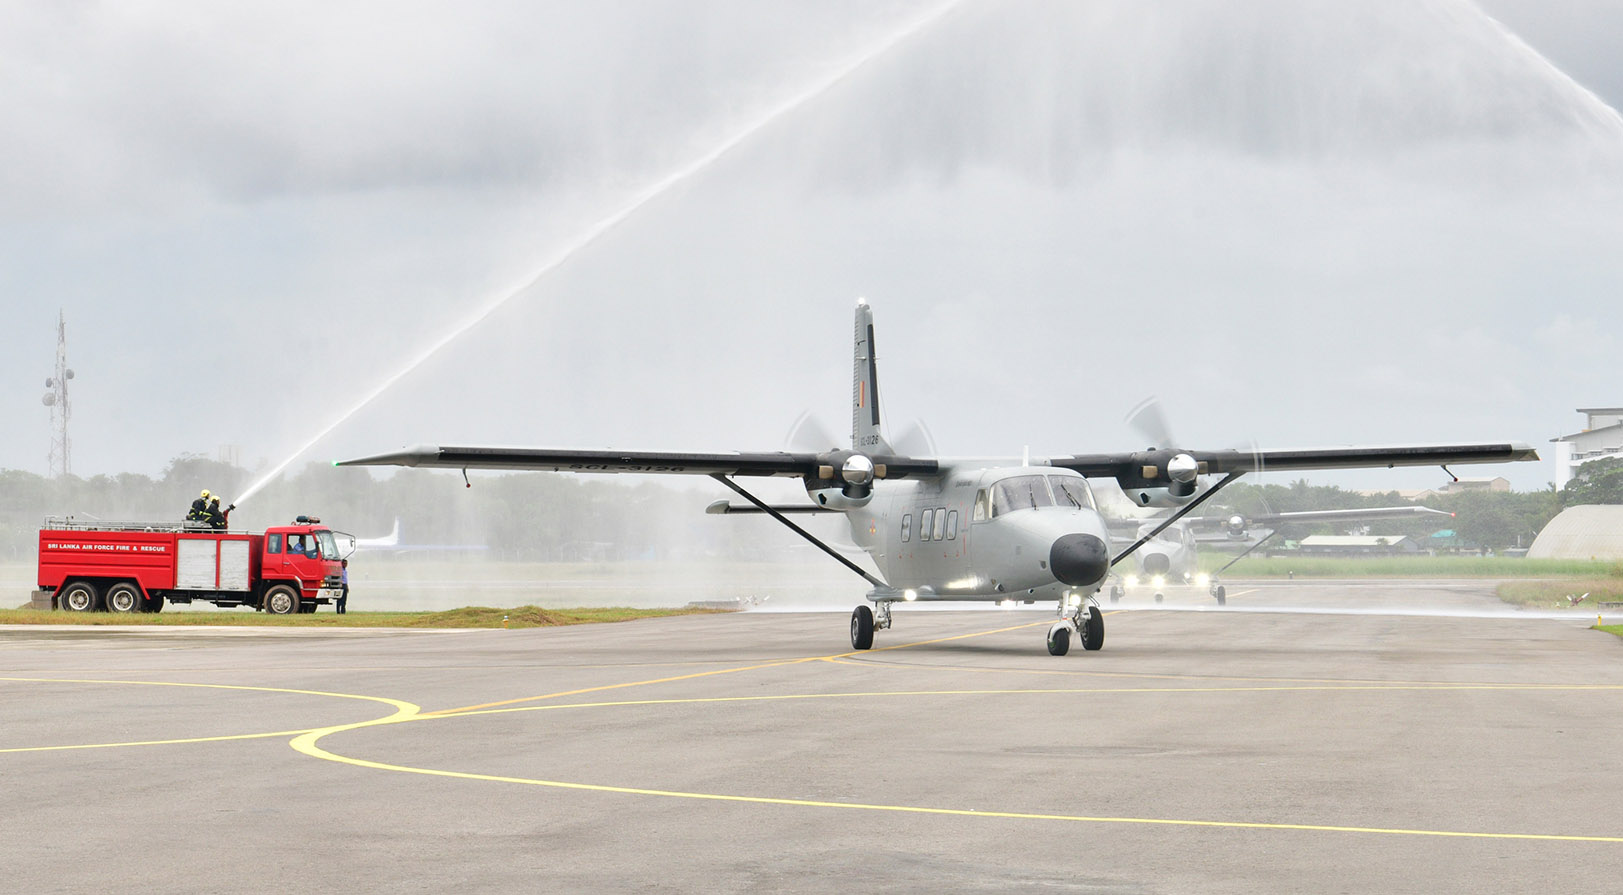 The two brand new Y-12 IVs get a traditional water salute by the fire department during their delivery (Image: SLAF)